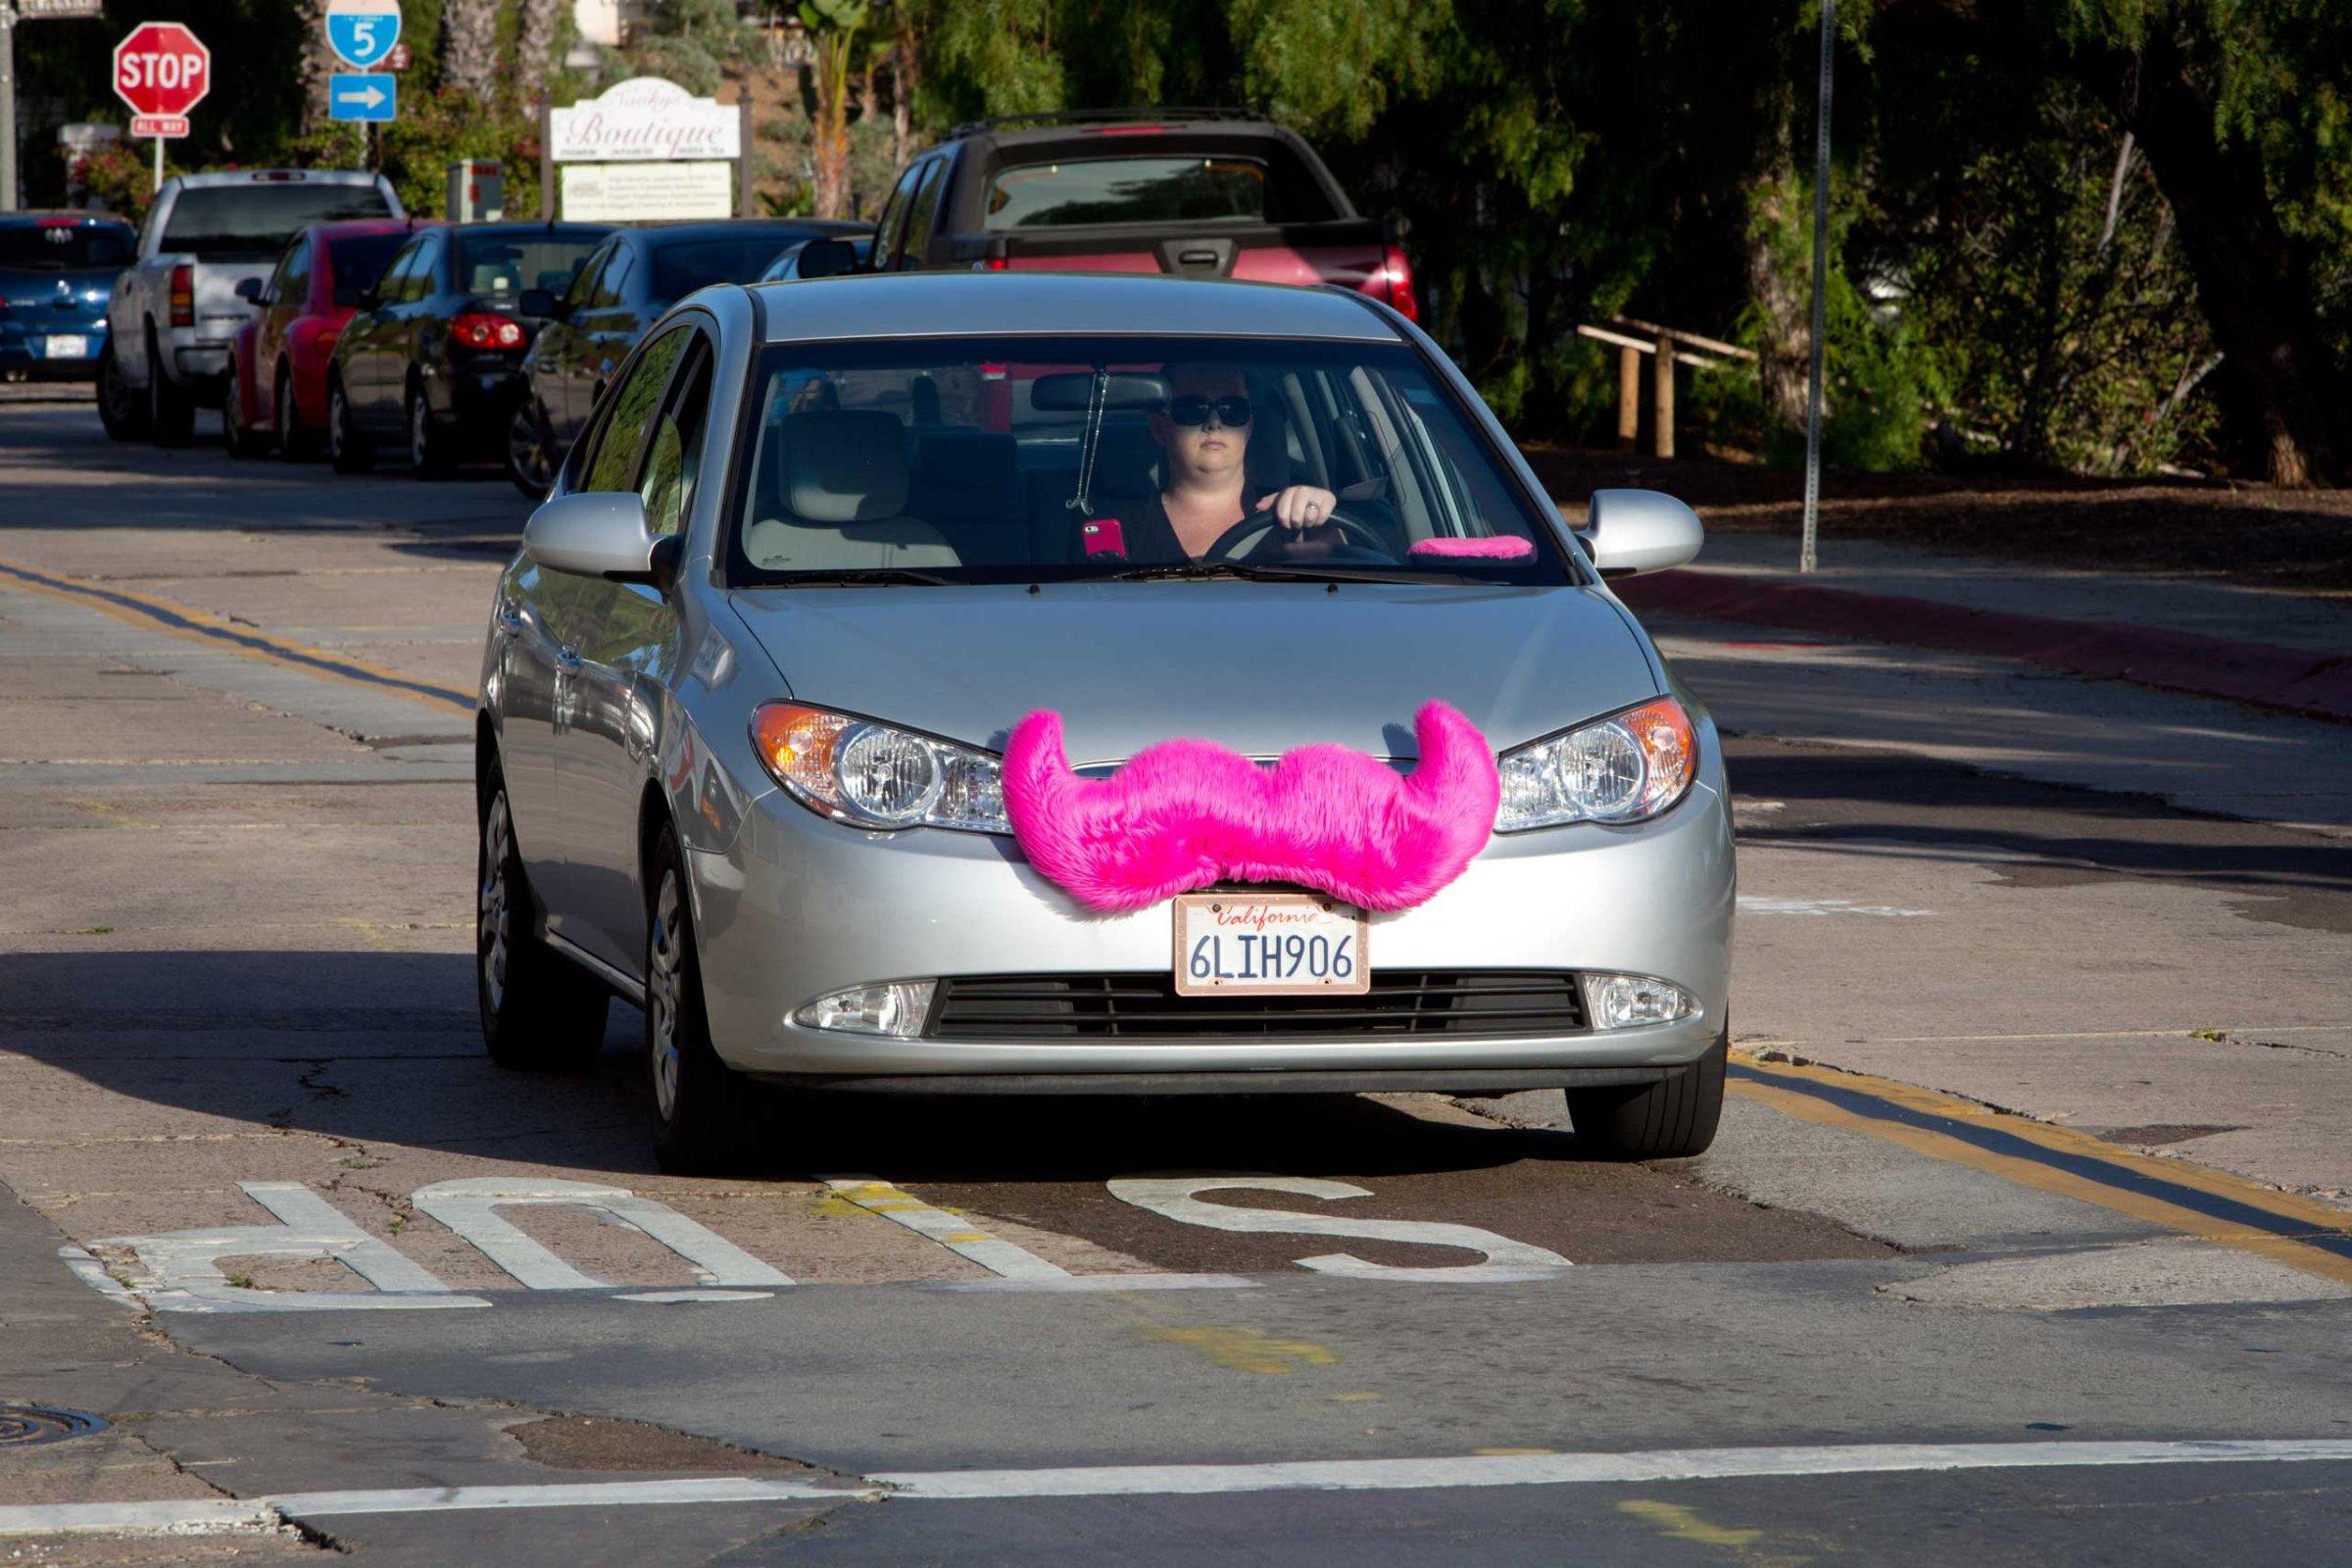 A woman is driving a car for the rideshare company Lyft with a fake jumbo pink moustache that attaches to the grille of the car, in June 2014. Lyft is said to be 30% cheaper than cabs. Photo by: Frank Duenzl/picture-alliance/dpa/AP Images